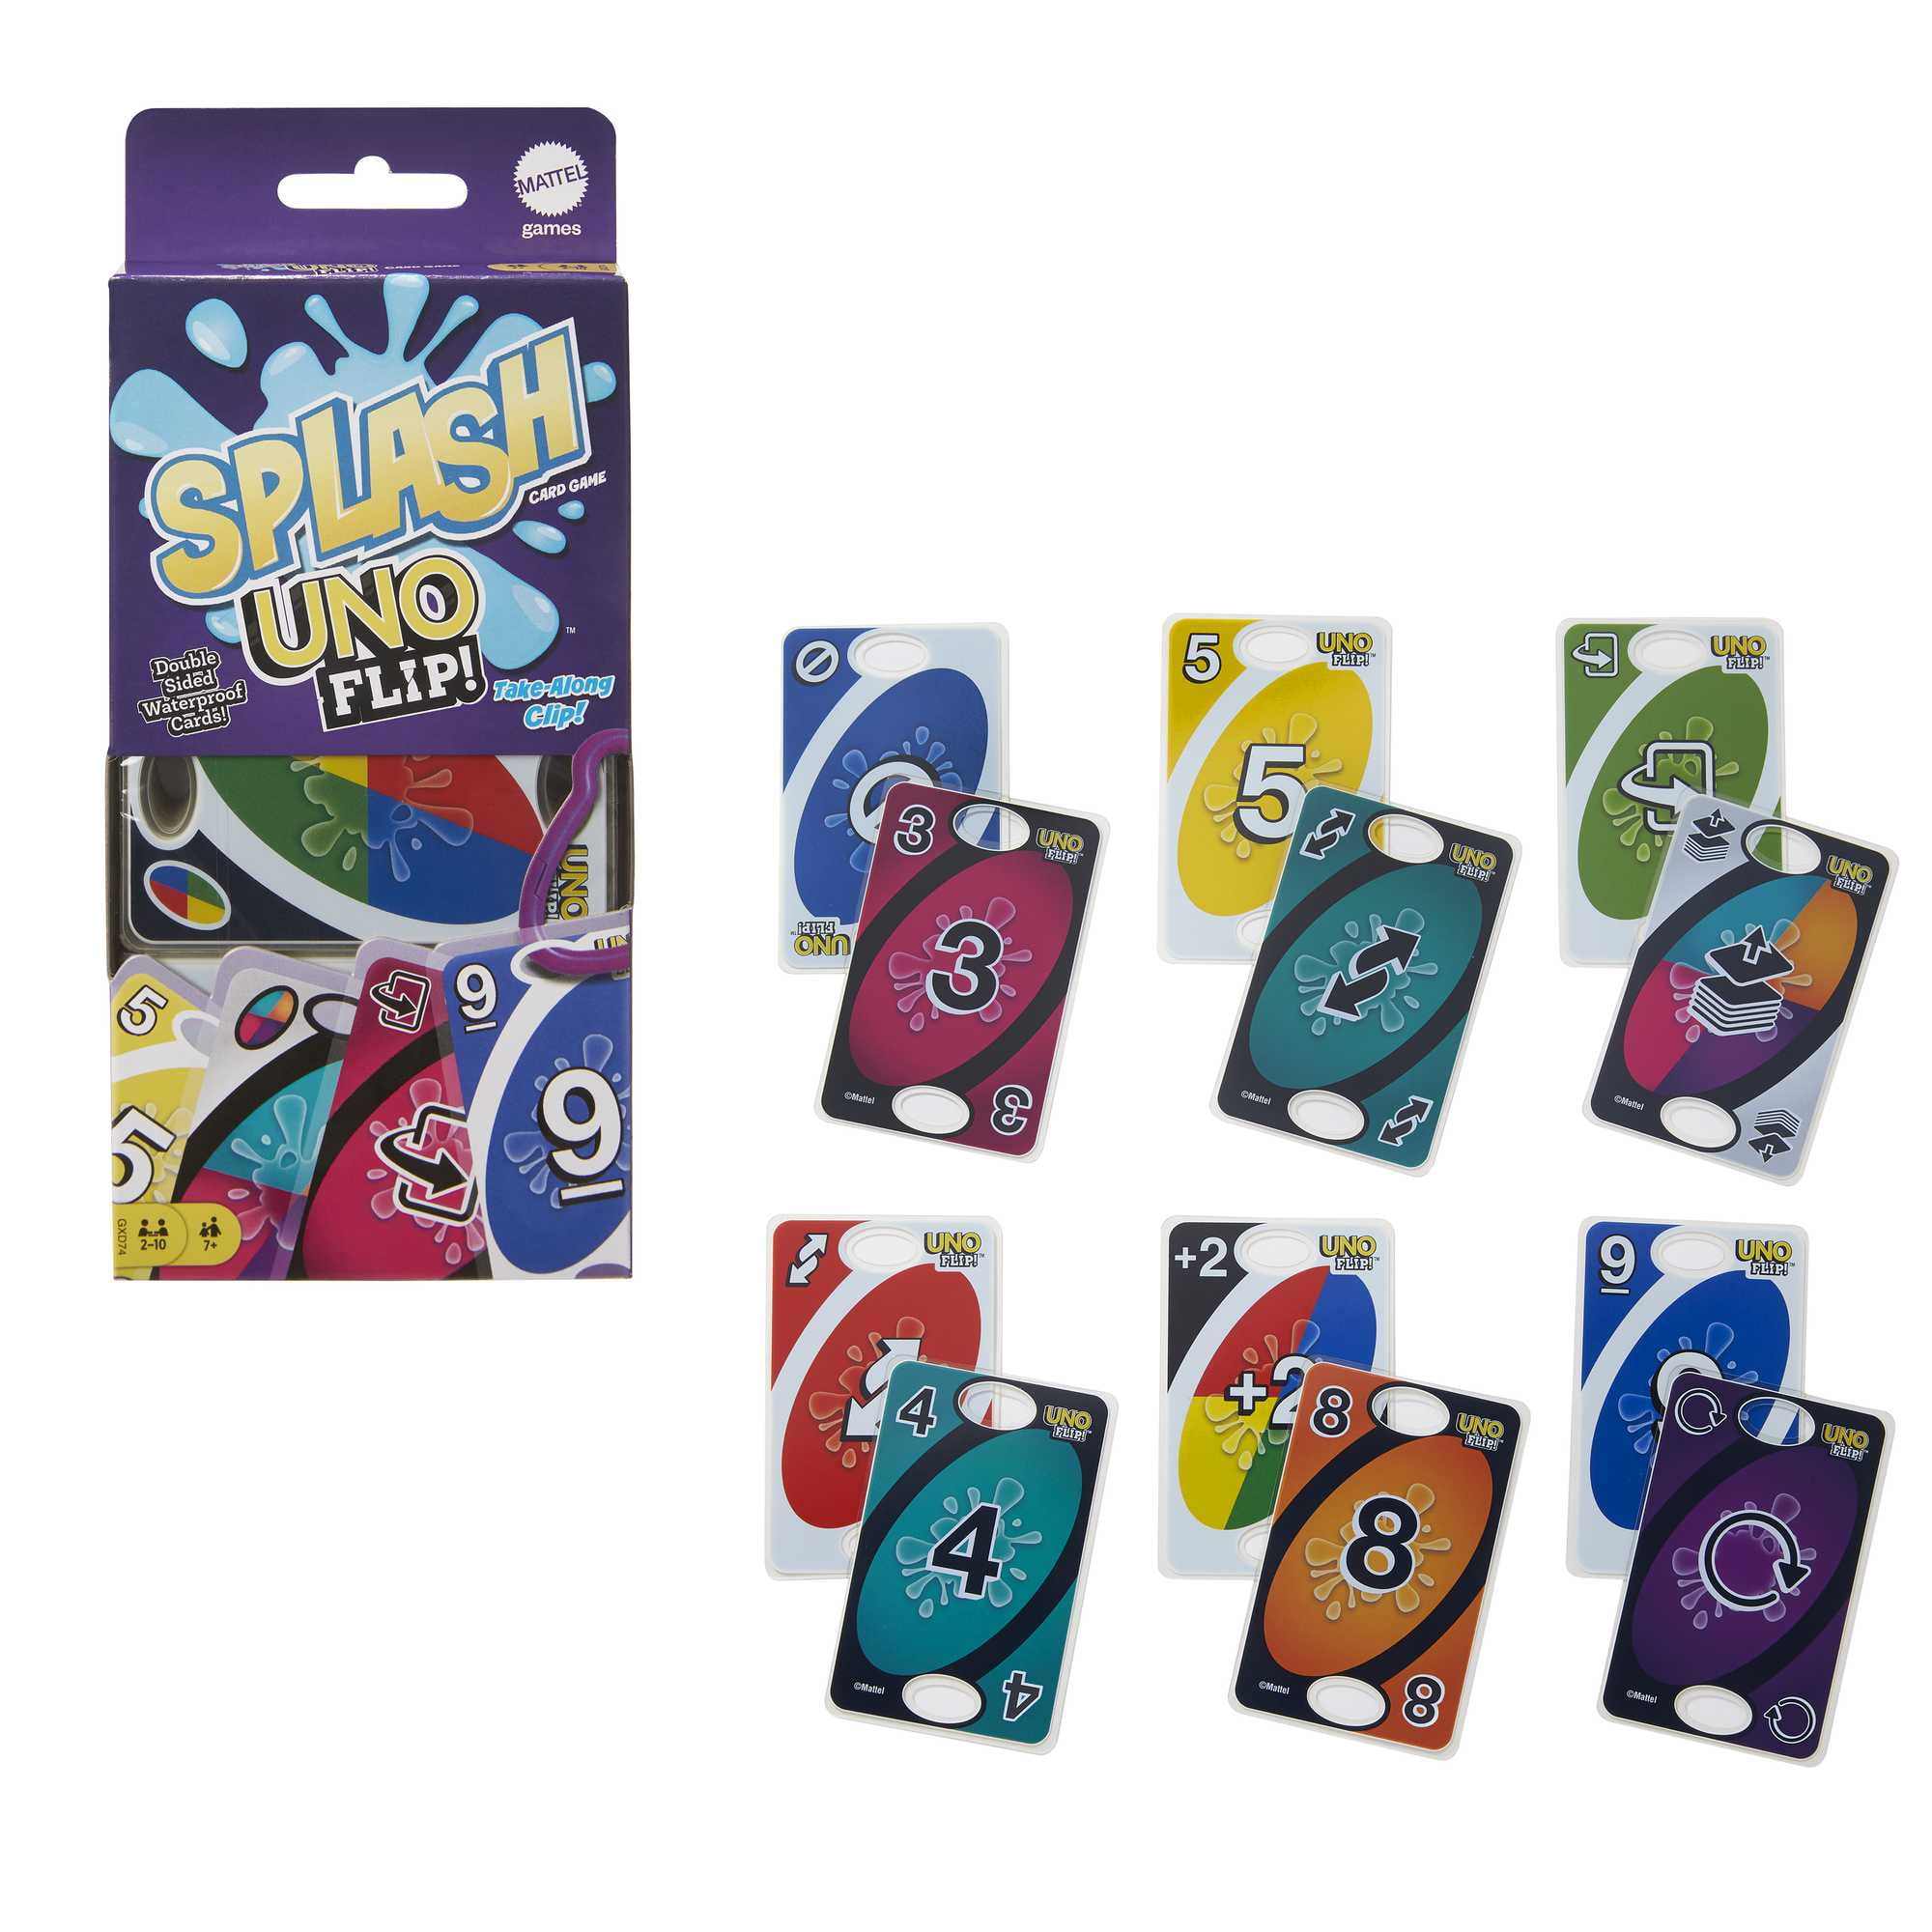 UNO Flip! Splash Card Game for Kids, Adults & Family Night with  Water-Resistant Double-Sided Cards 